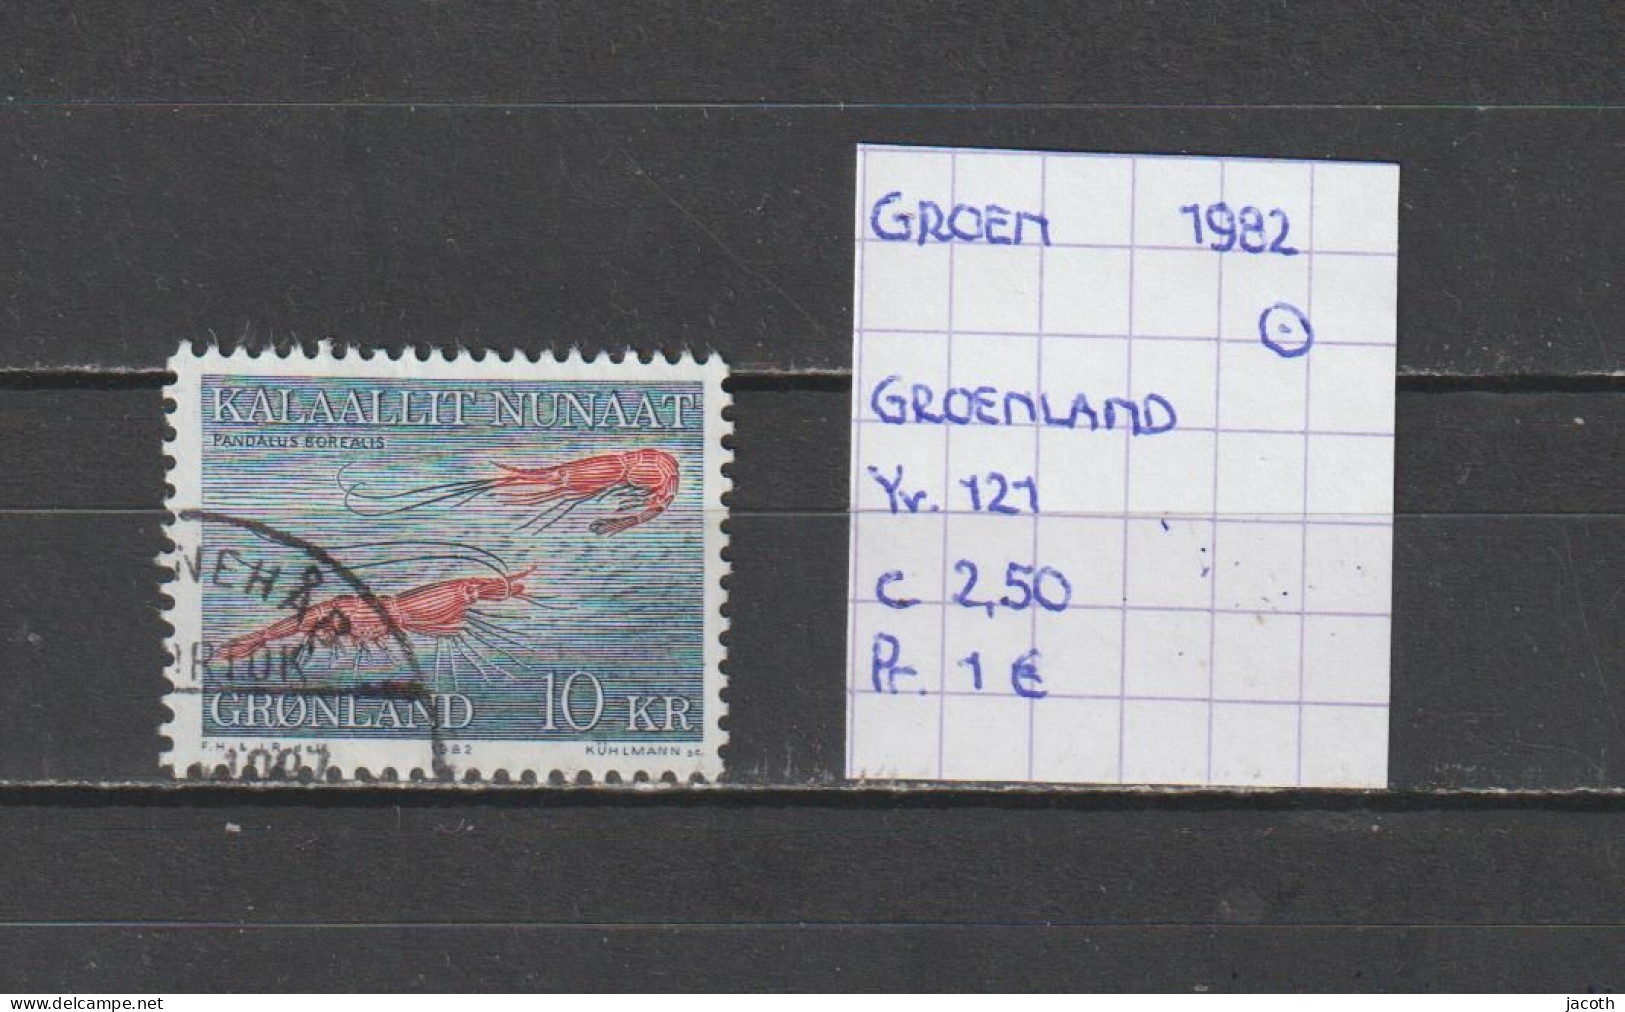 (TJ) Groenland 1982 - YT 121 (gest./obl./used) - Used Stamps